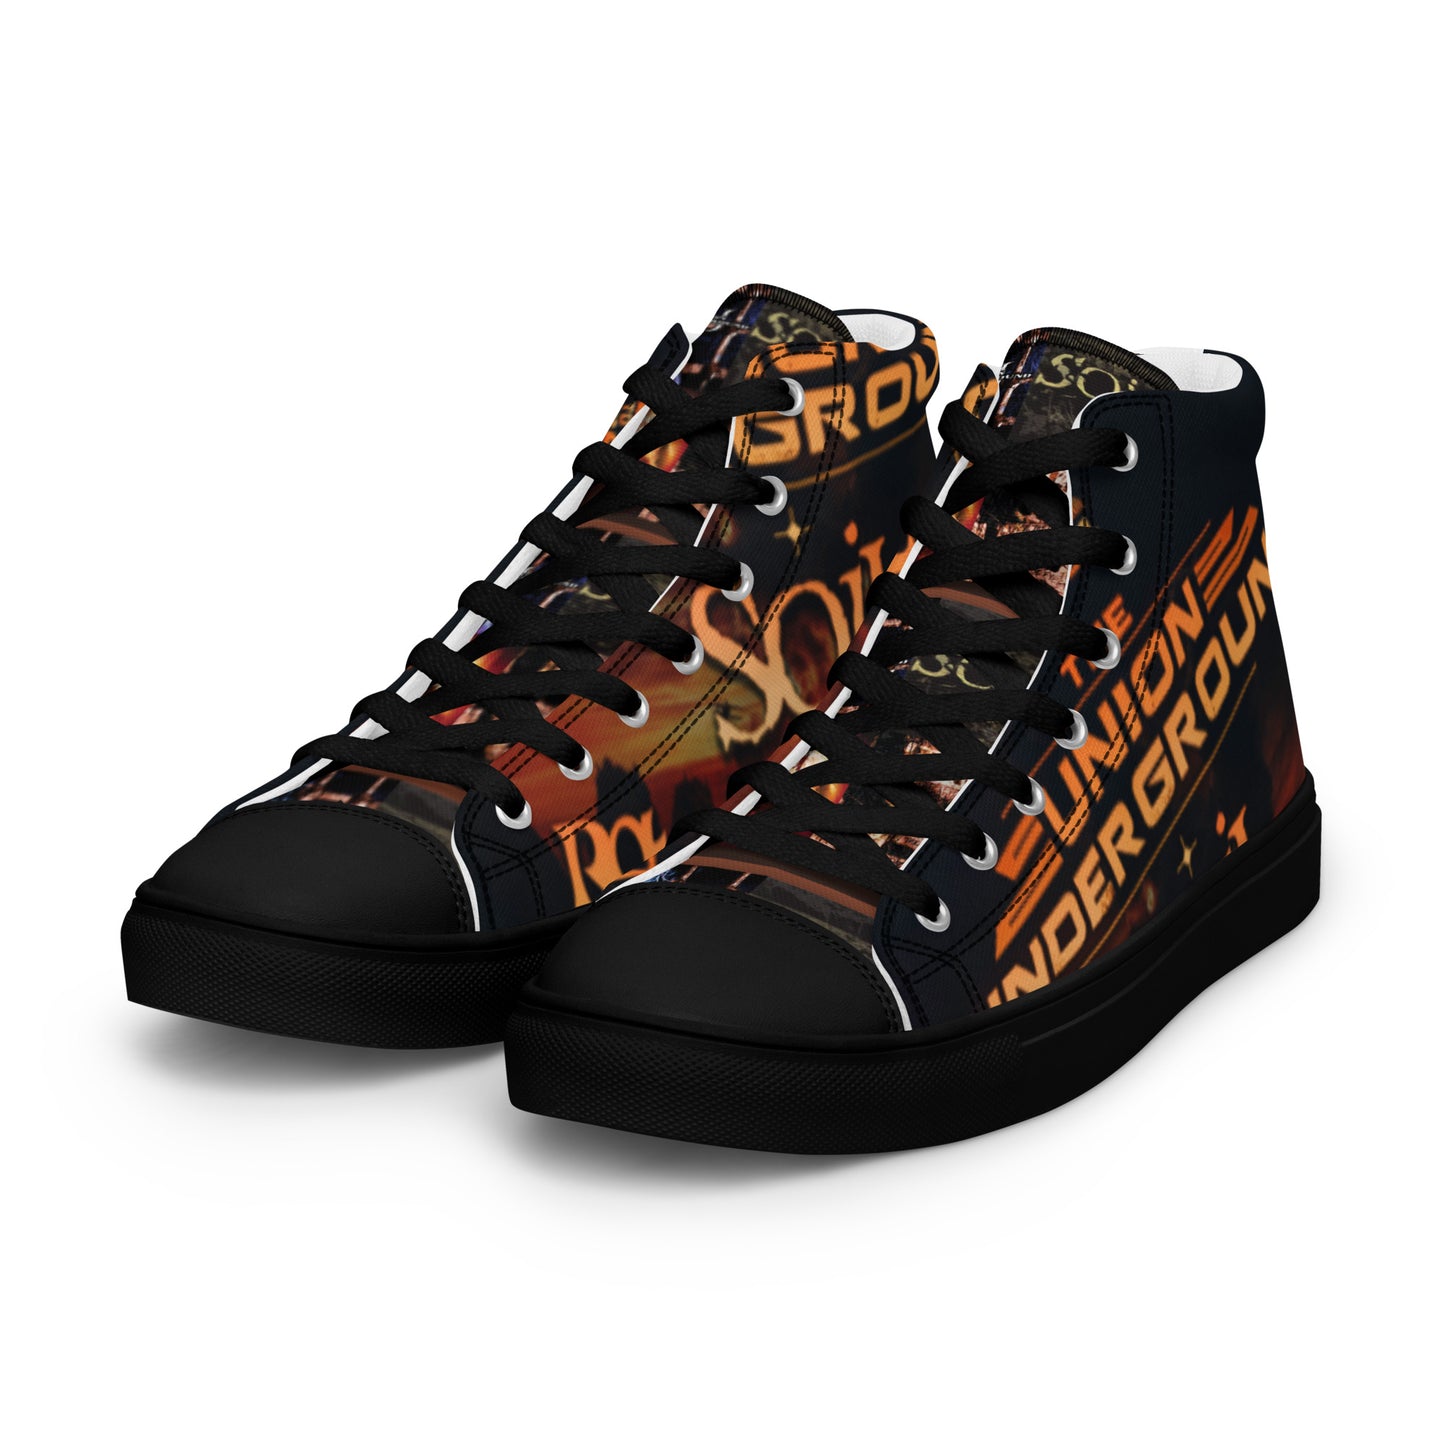 The Union Underground Back to the 2000's High top canvas shoes